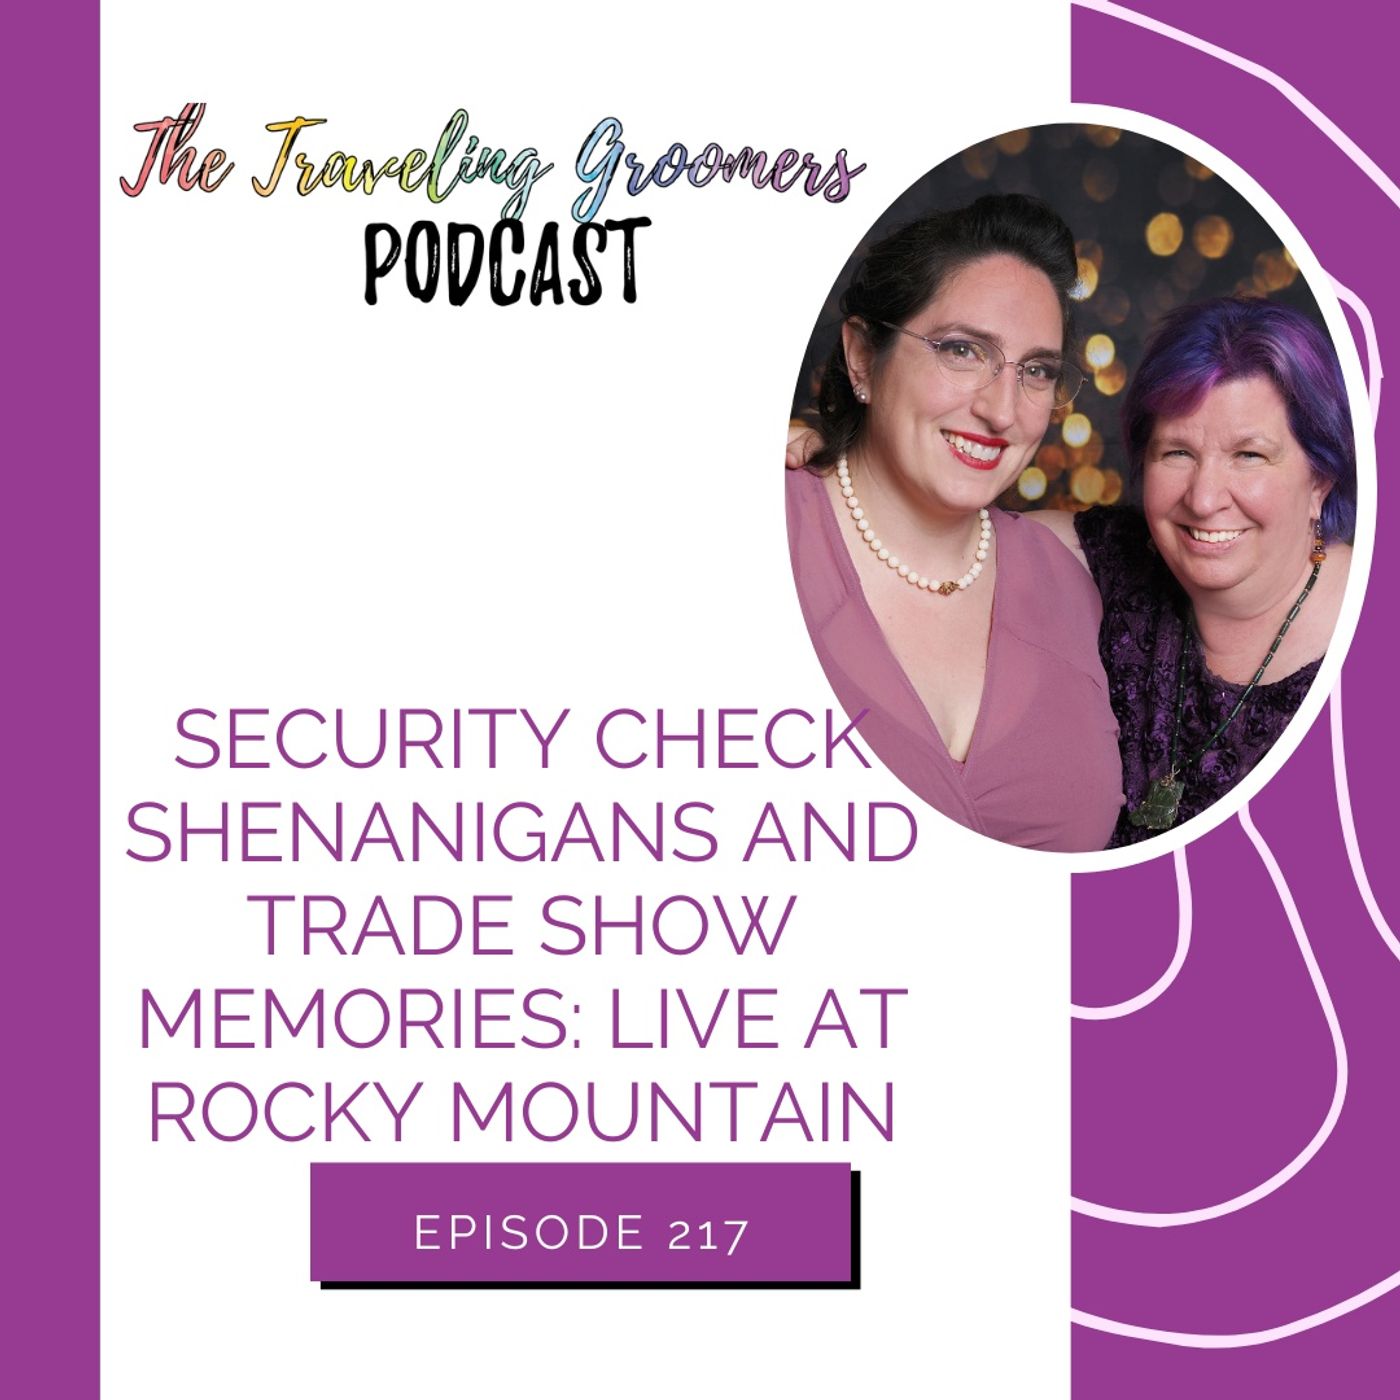 Security Check Shenanigans and Trade Show Memories Live at Rocky Mountain